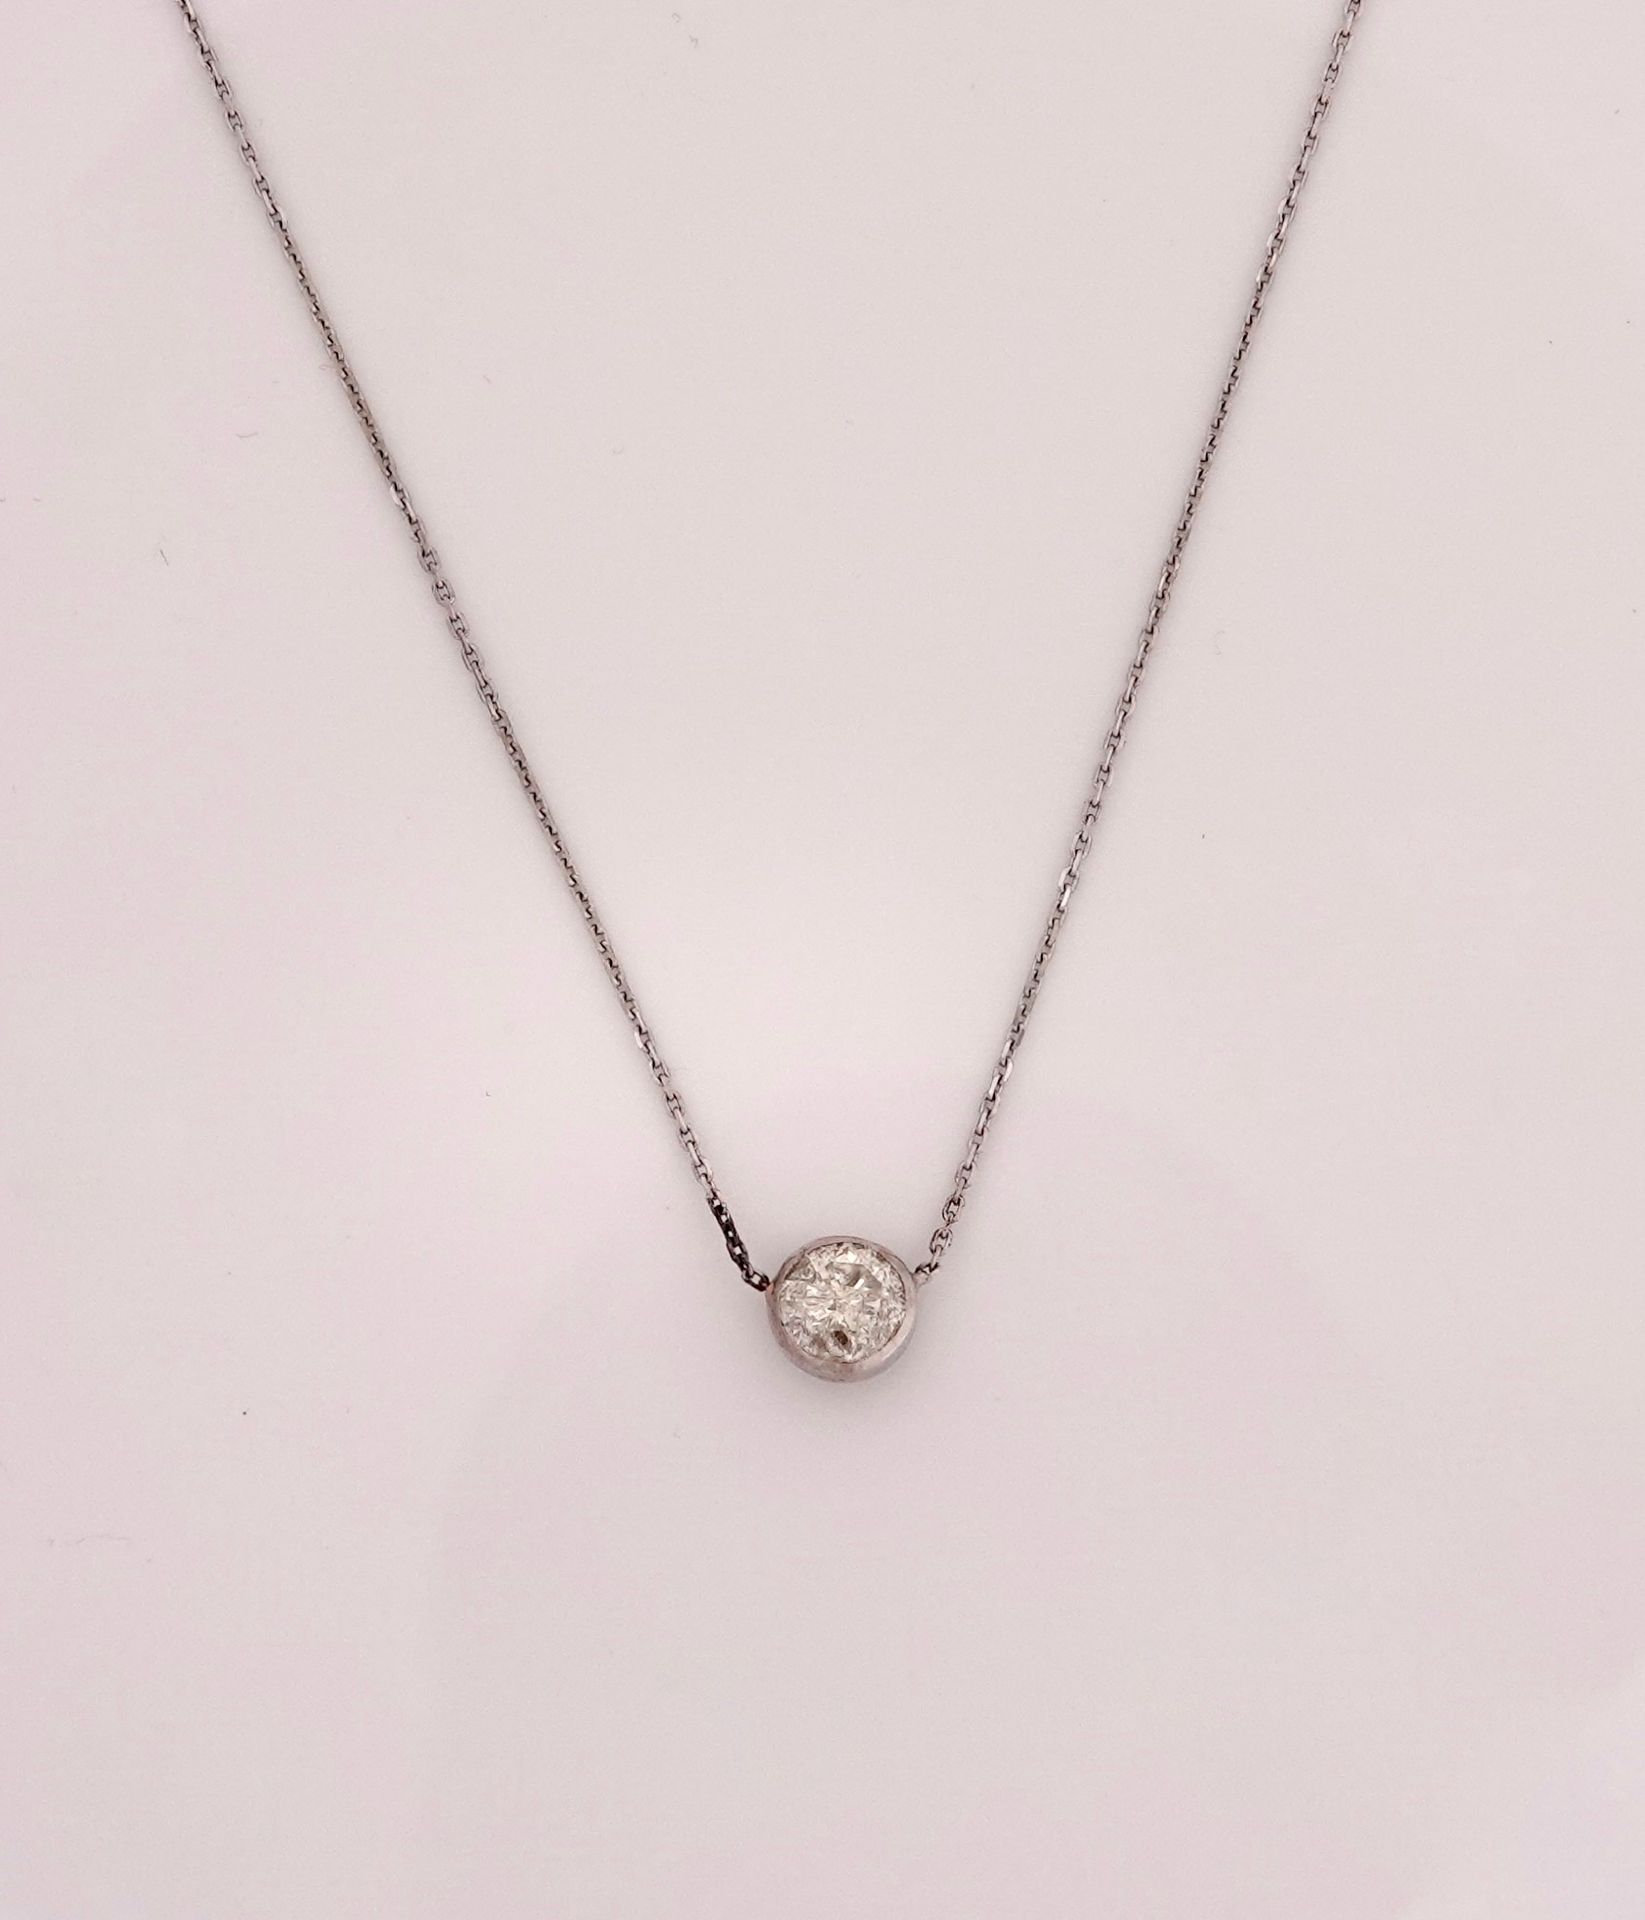 Null Chain and pendant in white gold, 750 MM, set with a round diamond weighing &hellip;